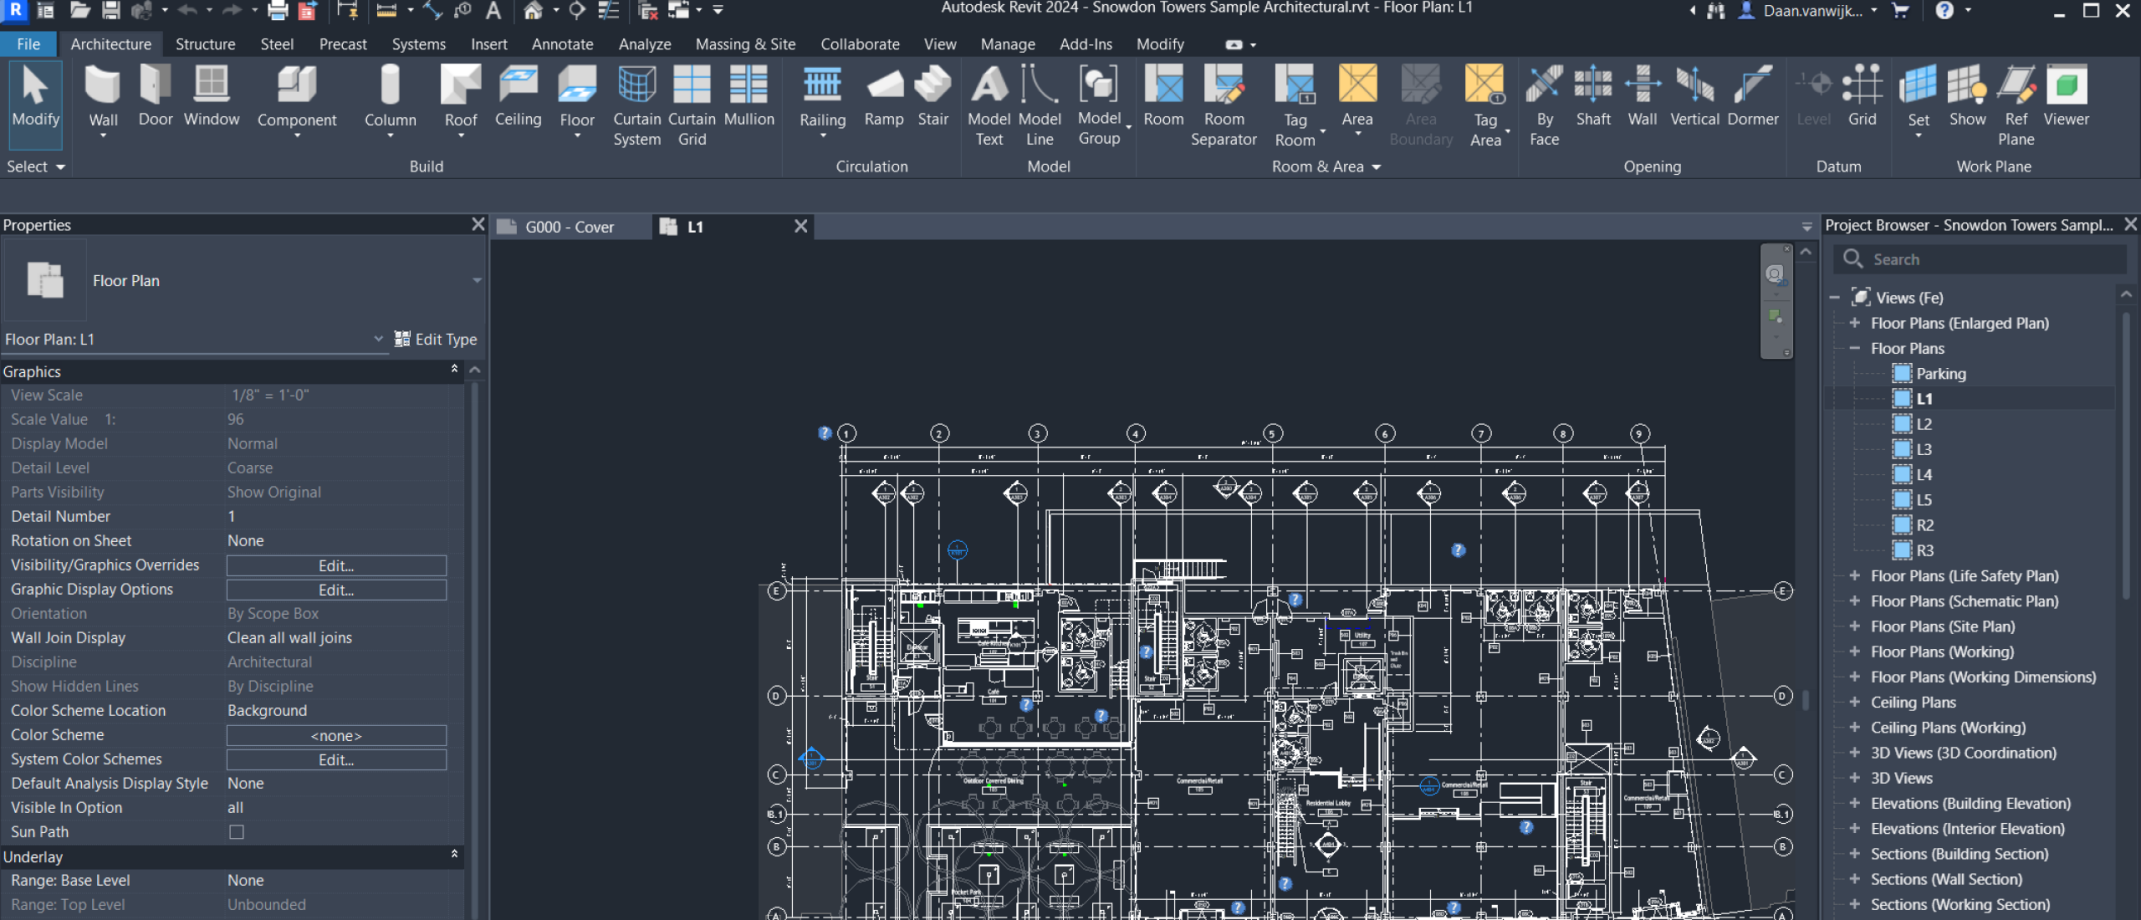 download the new version for mac Autodesk Revit 2024.2